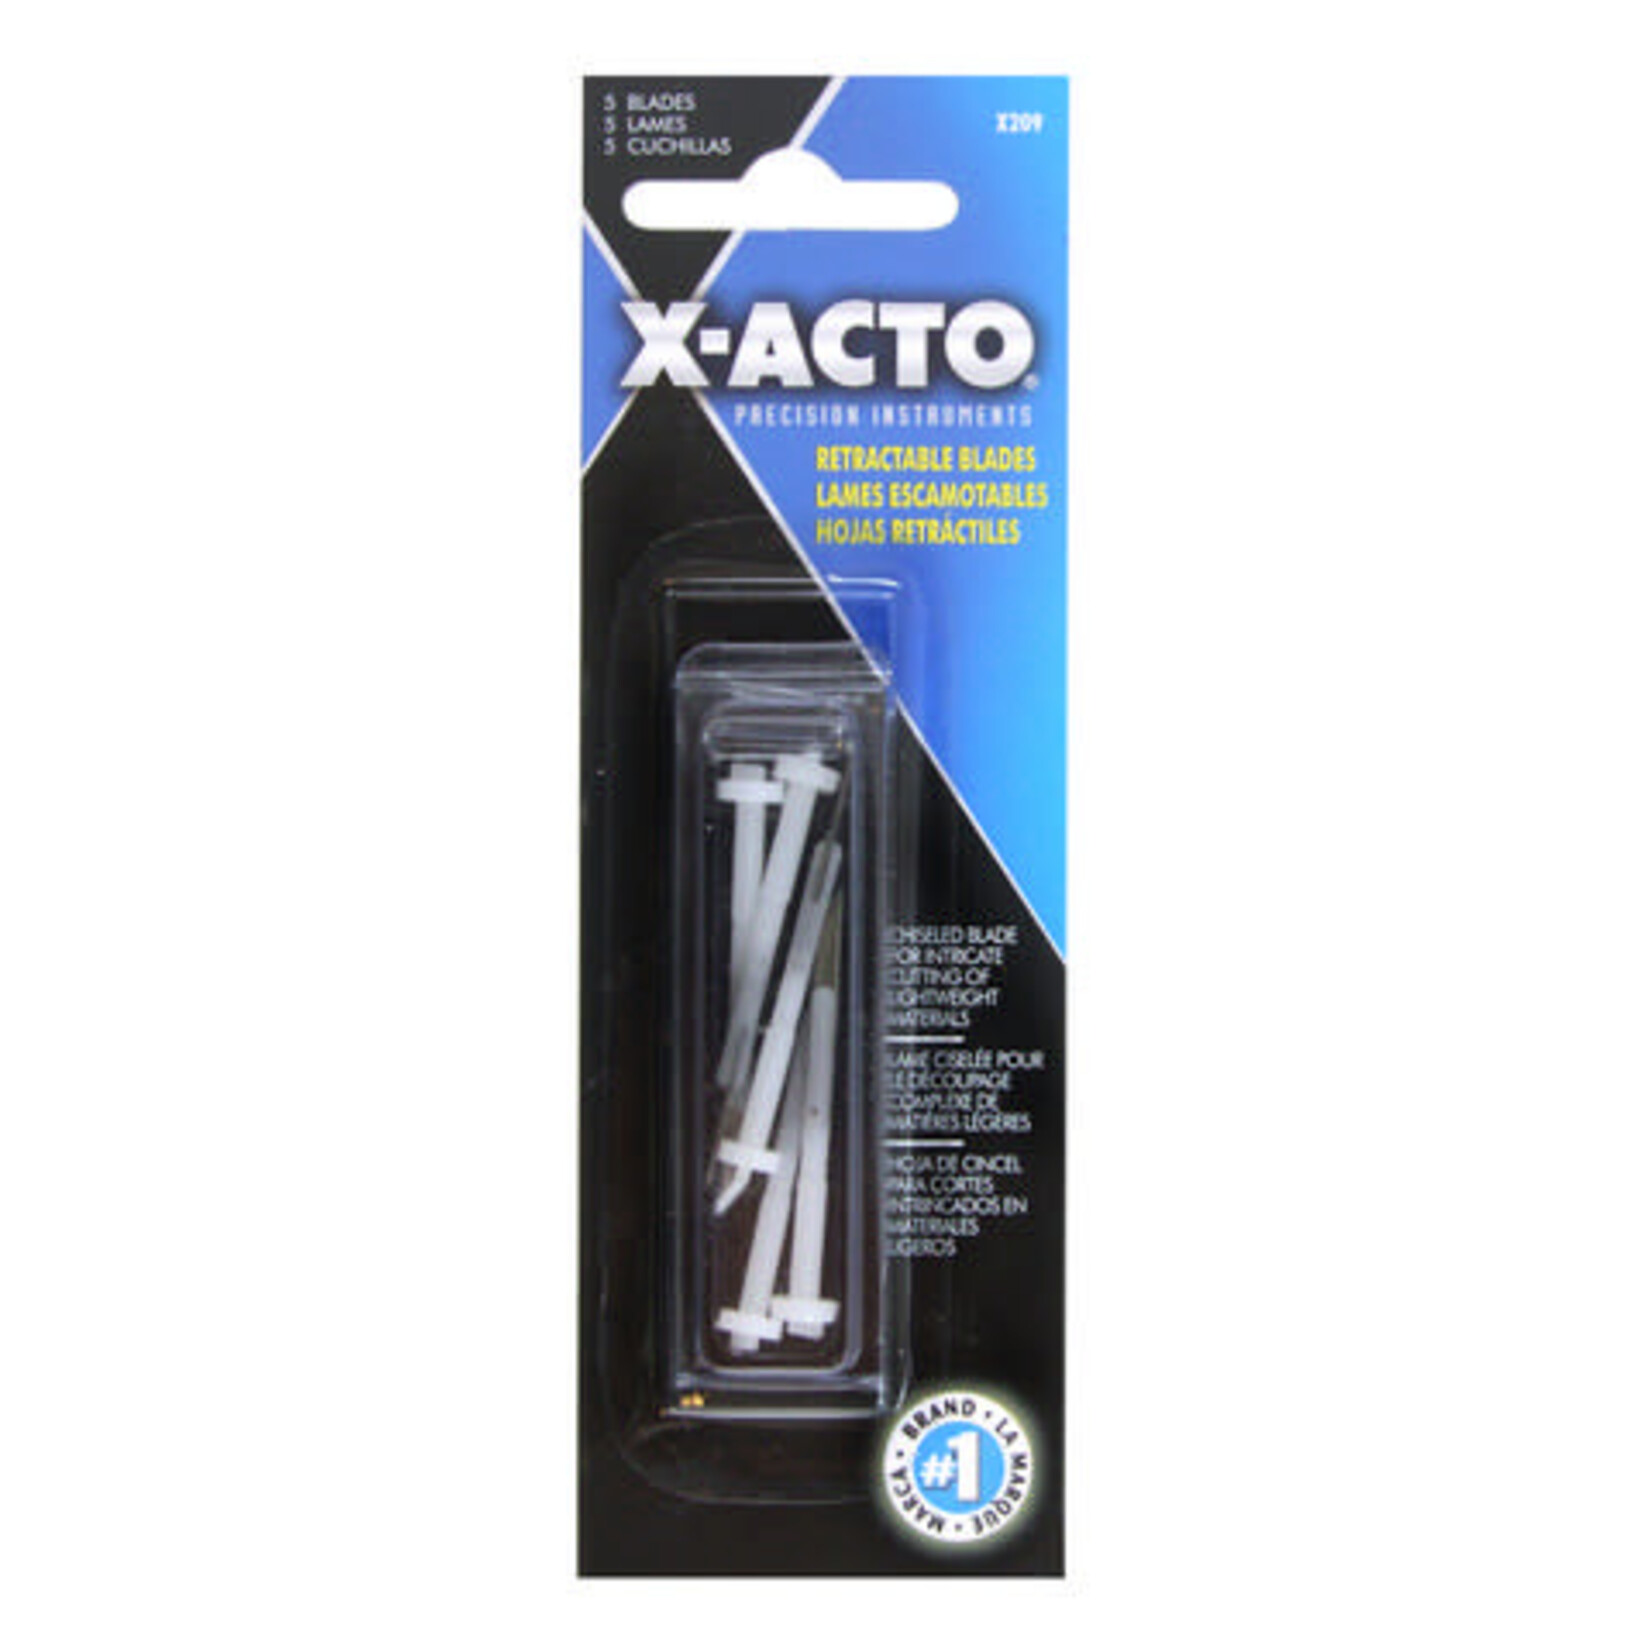 Xacto Blade #9 5 Pack For Knife #9Rx